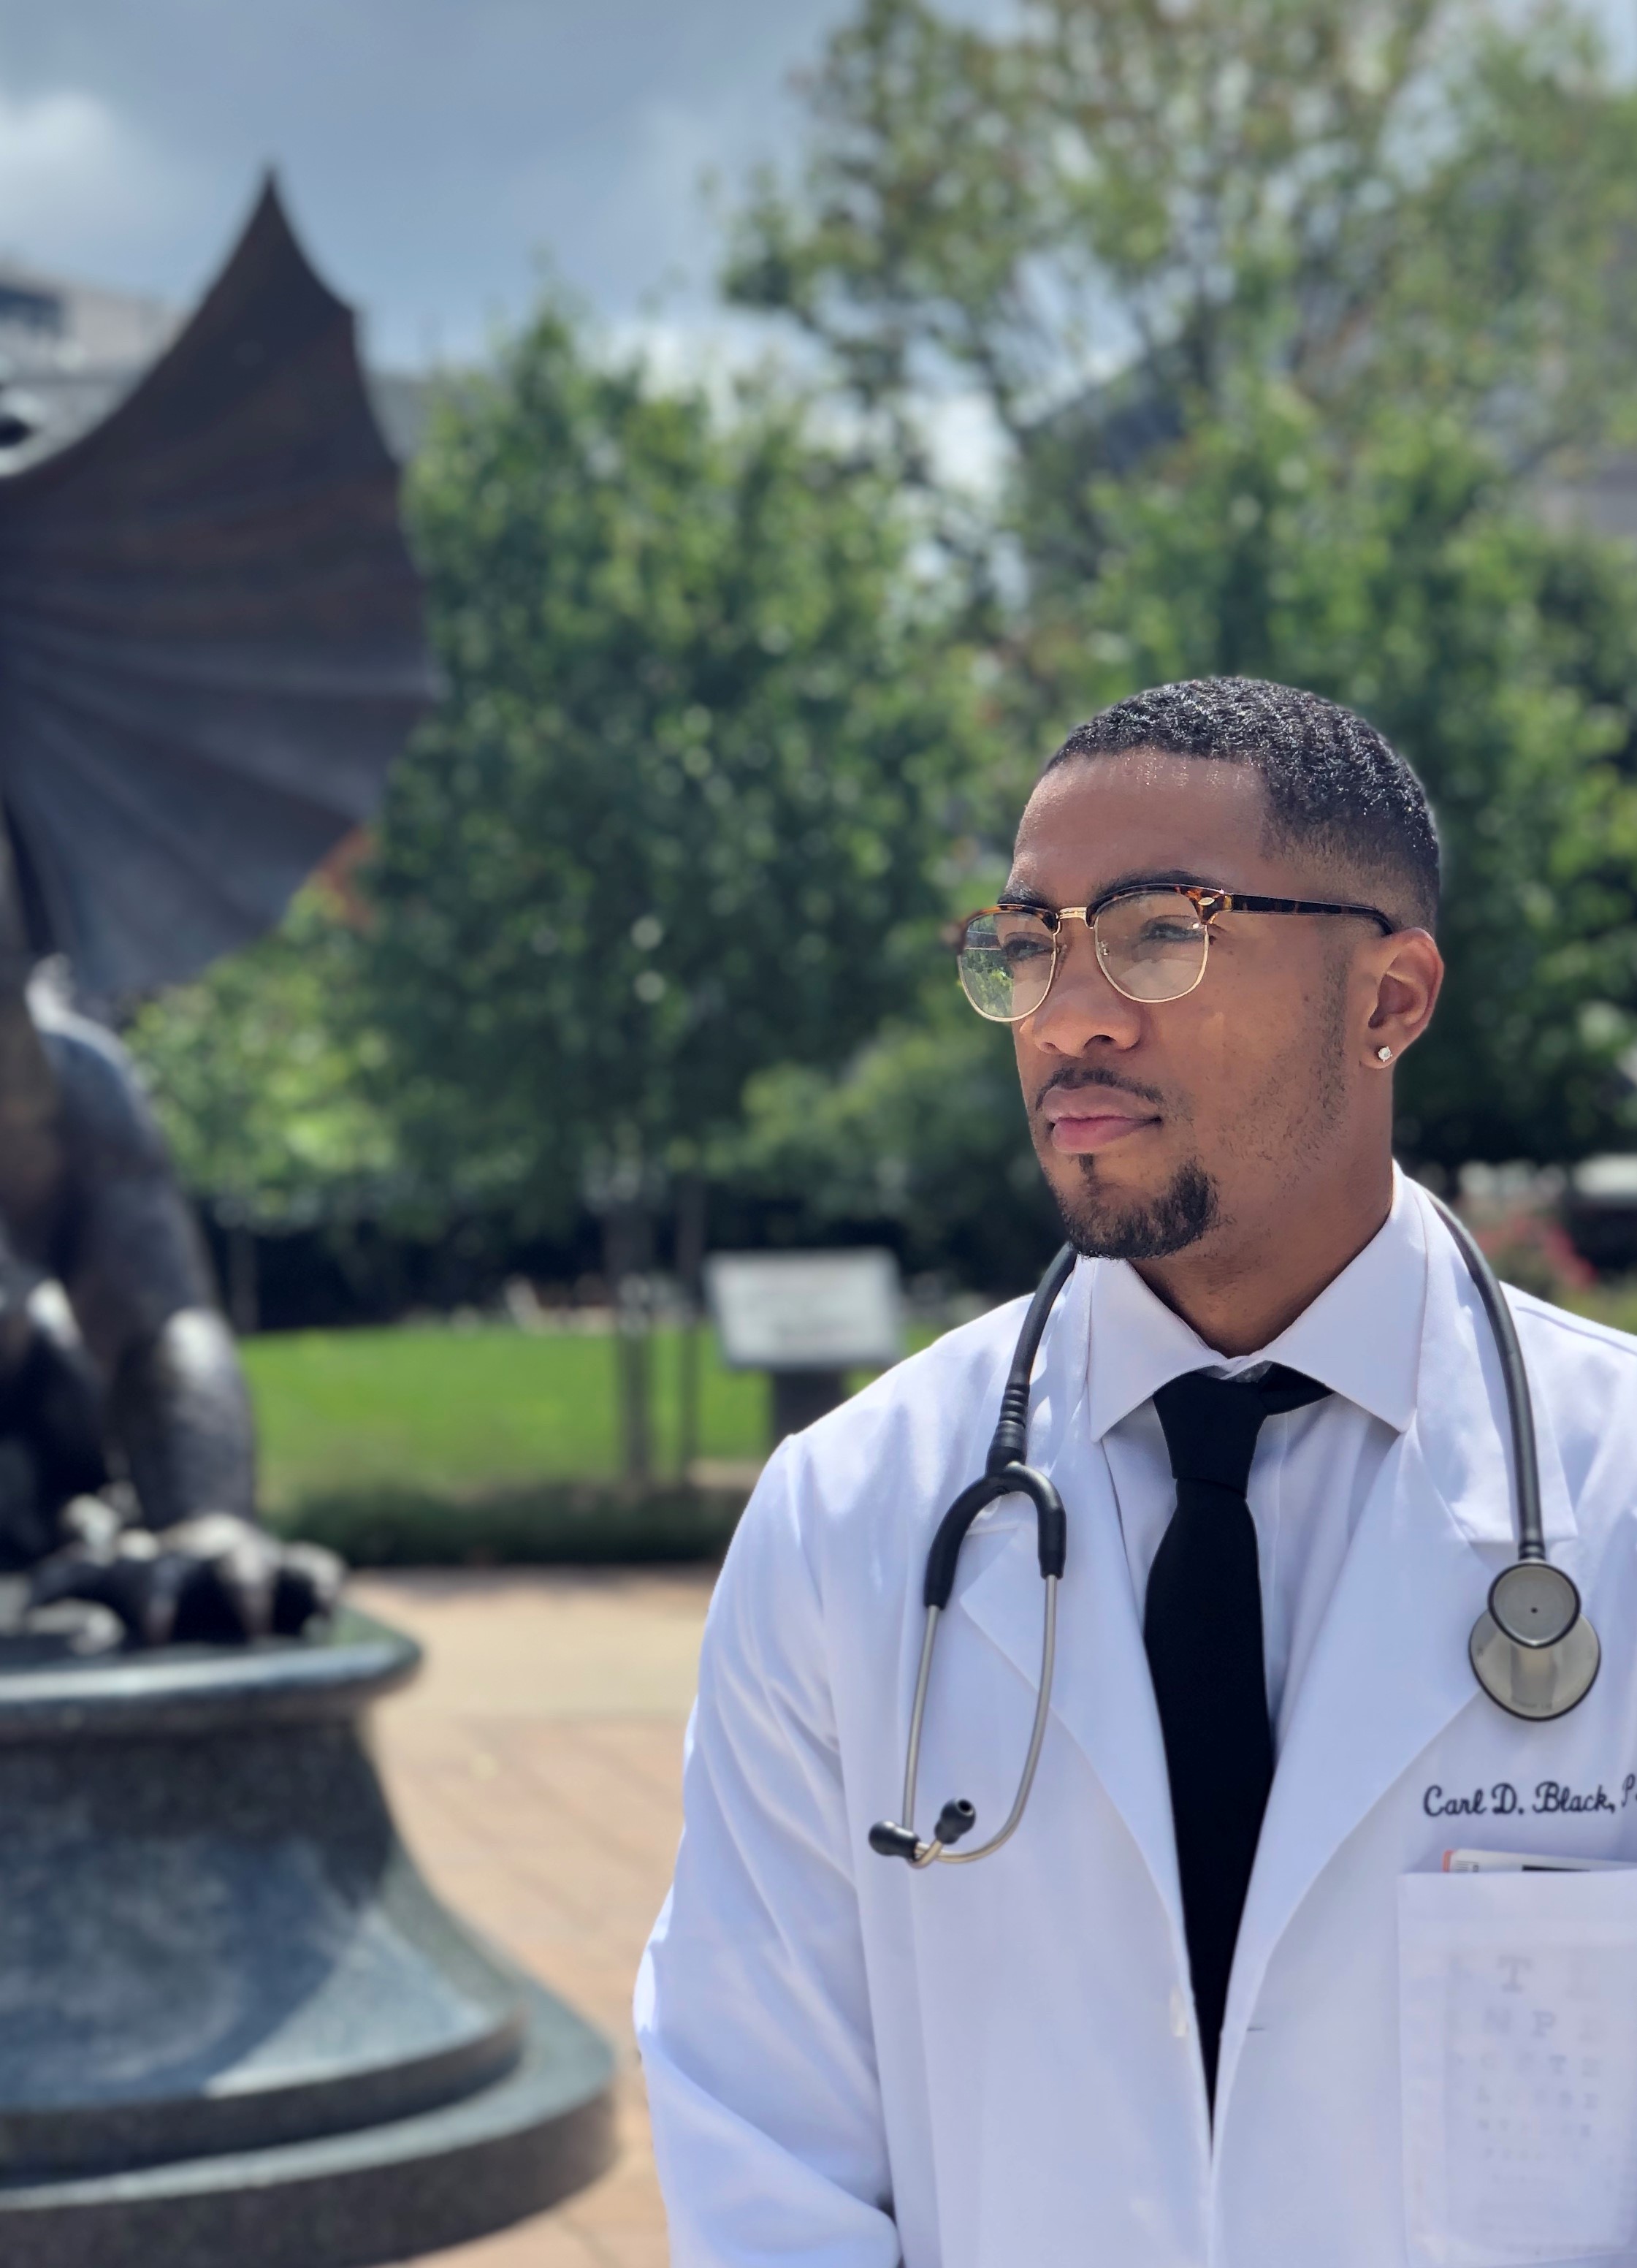 Carl Black wears white coat with stethoscope around his neck